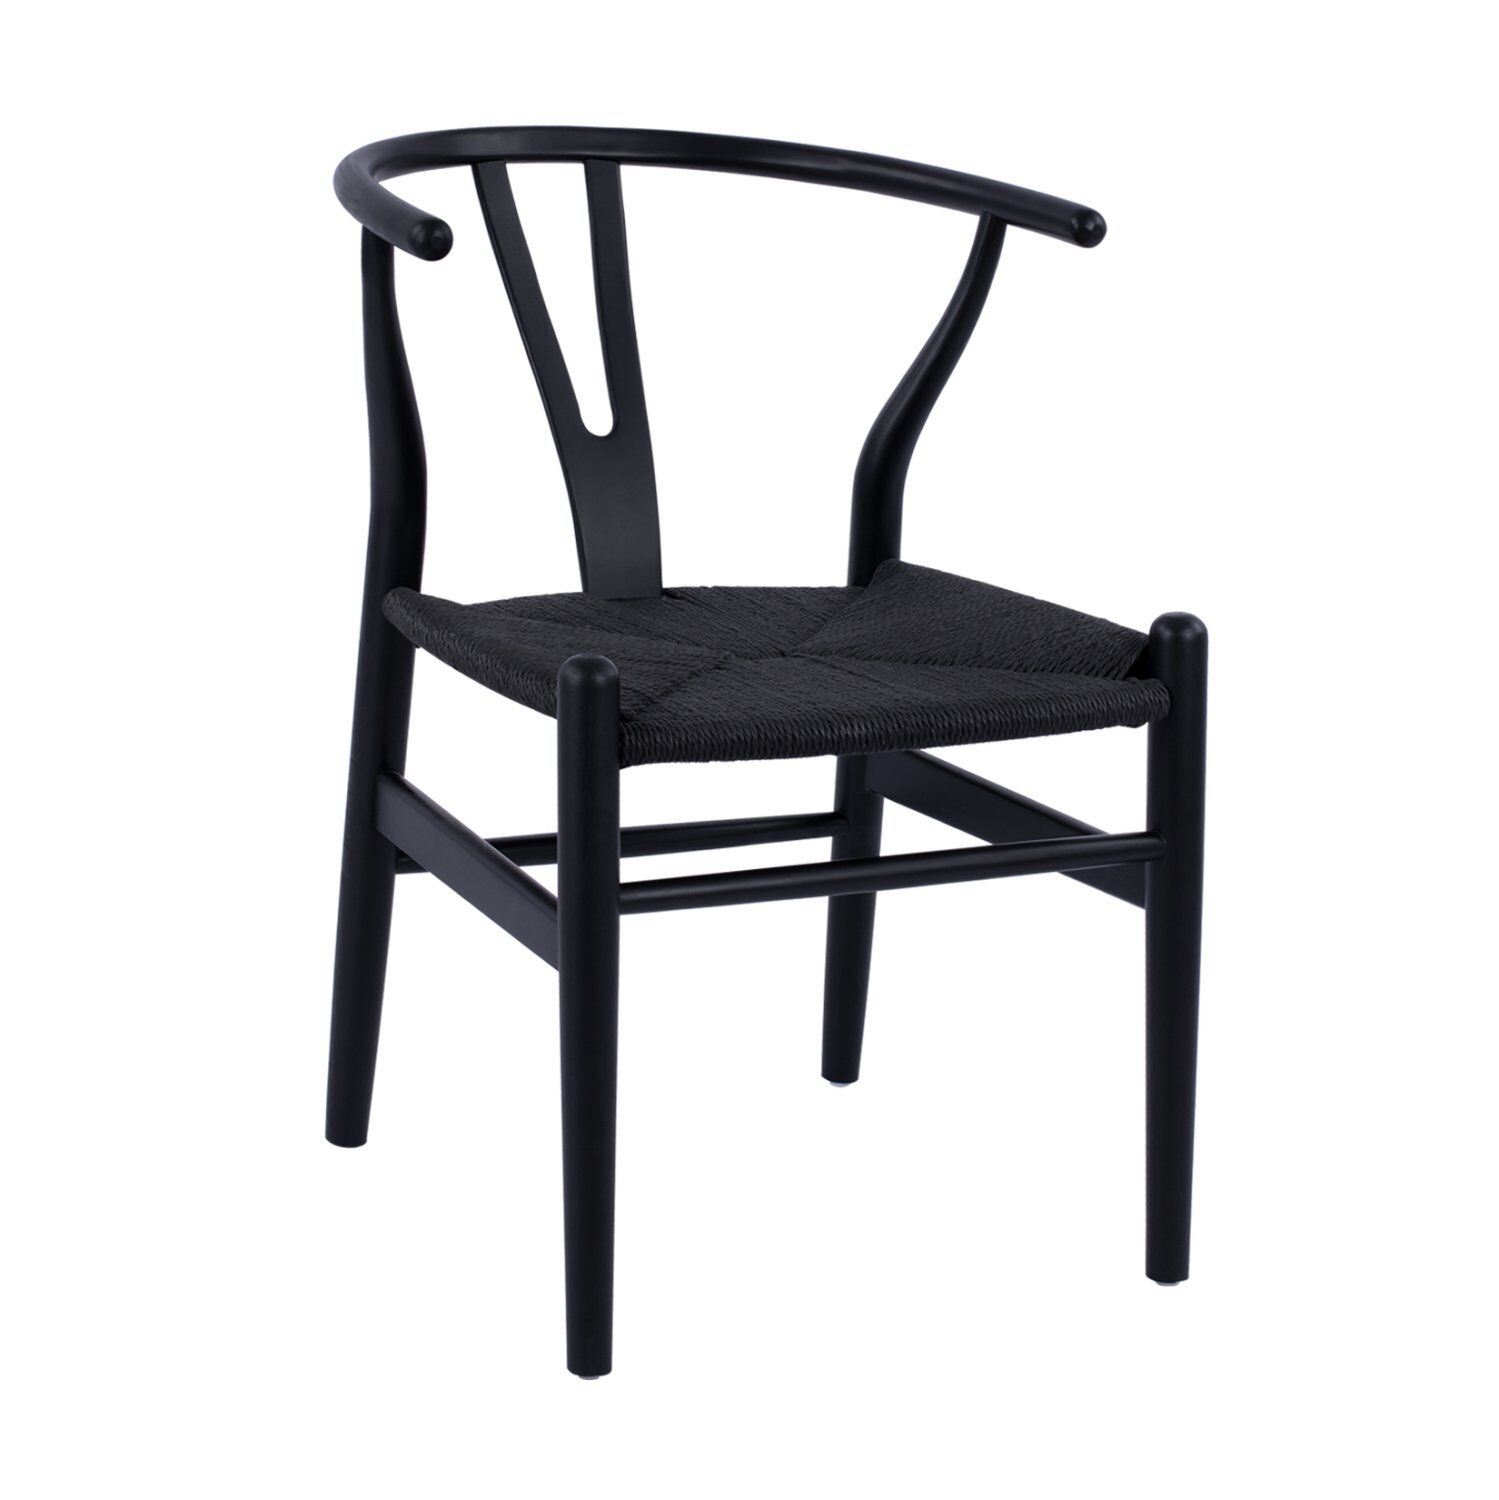 DINING CHAIR FB98695.02 BEECH WOOD IN BLACK-ROPE IN BLACK 56x52x76Hcm